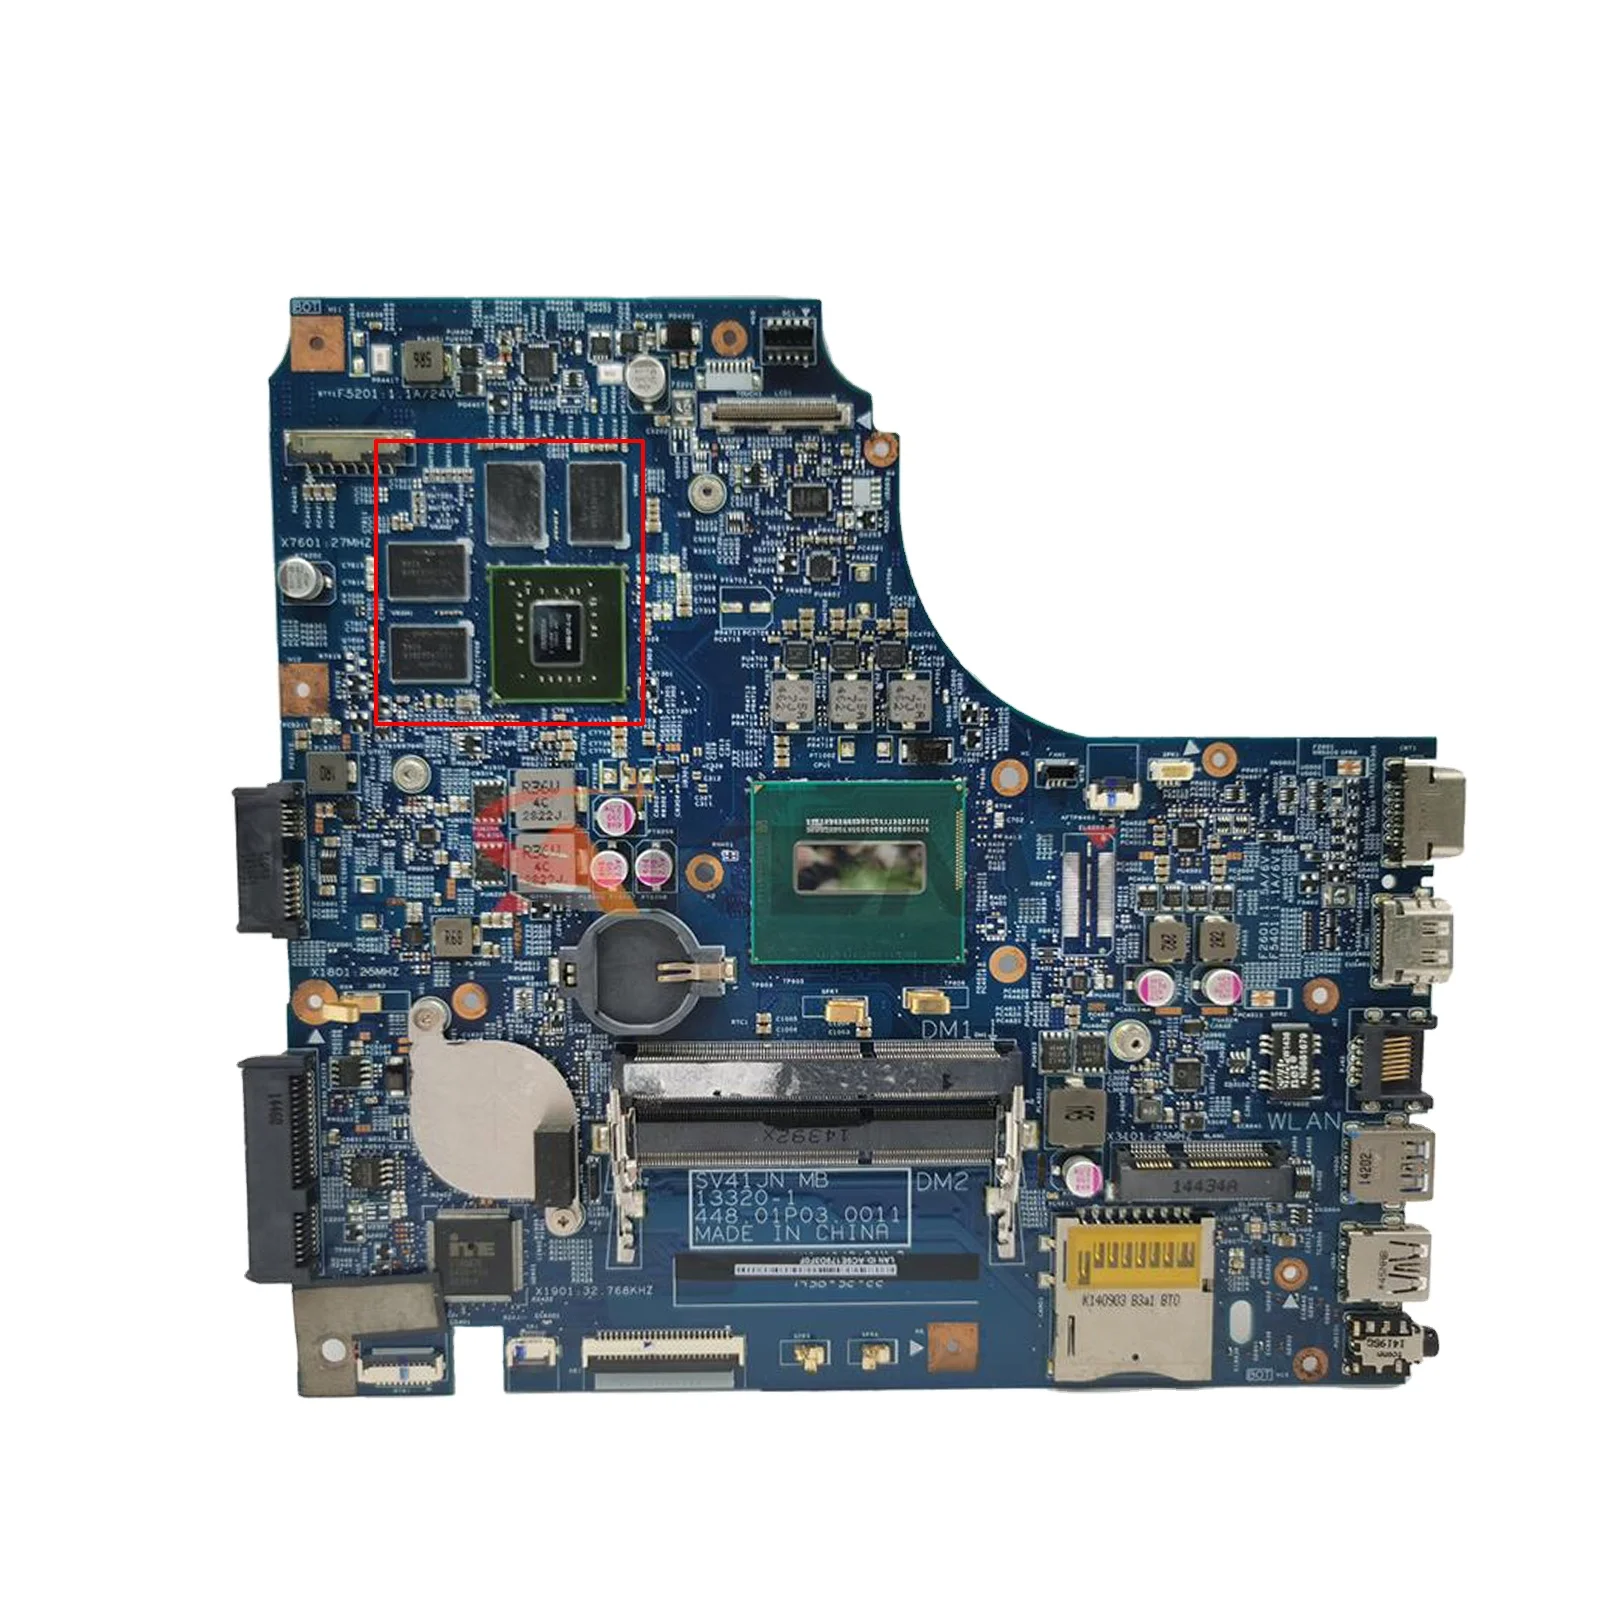 

X450JN i5-4200HQ i7-4700HQ CPU GT745M GT840M GPU Notebook Mainboard for ASUS X450J SV41JN X450 A450J A450JN Laptop Motherboard